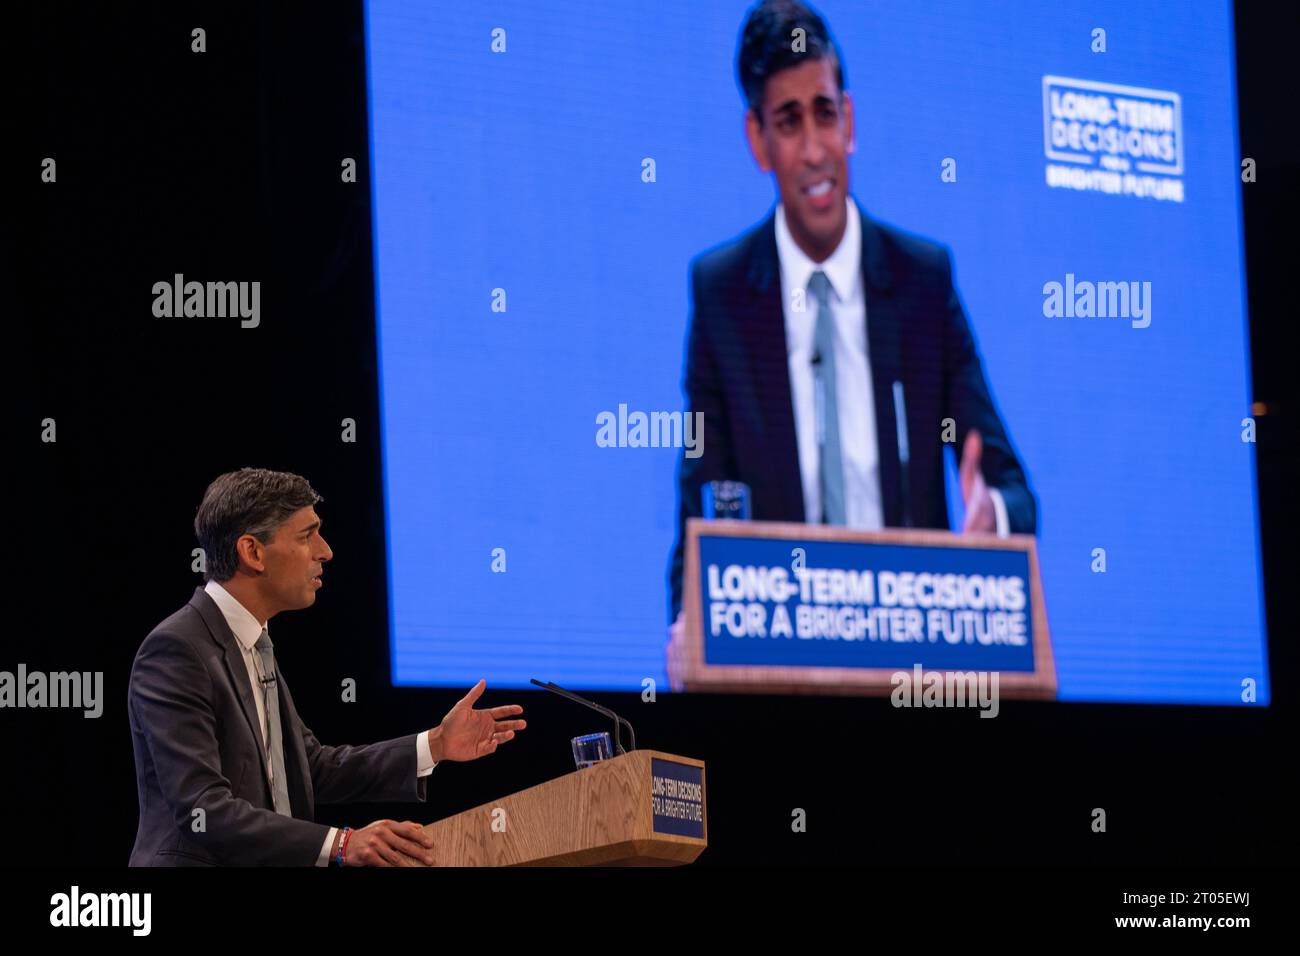 Manchester, UK. 04th Oct, 2023. Rishi Sunak UK Prime Minister gives the final speech of the conservative party conference 2023. Penny Mordaunt and Johnny Mercer had both given speeches earlier. The PM walked from the Midland Hotel to the Manchester Conference centre where he gave the speech introduced by his wife Akshata Murthy. Manchester UK. Credit: GaryRobertsphotography/Alamy Live News Stock Photo